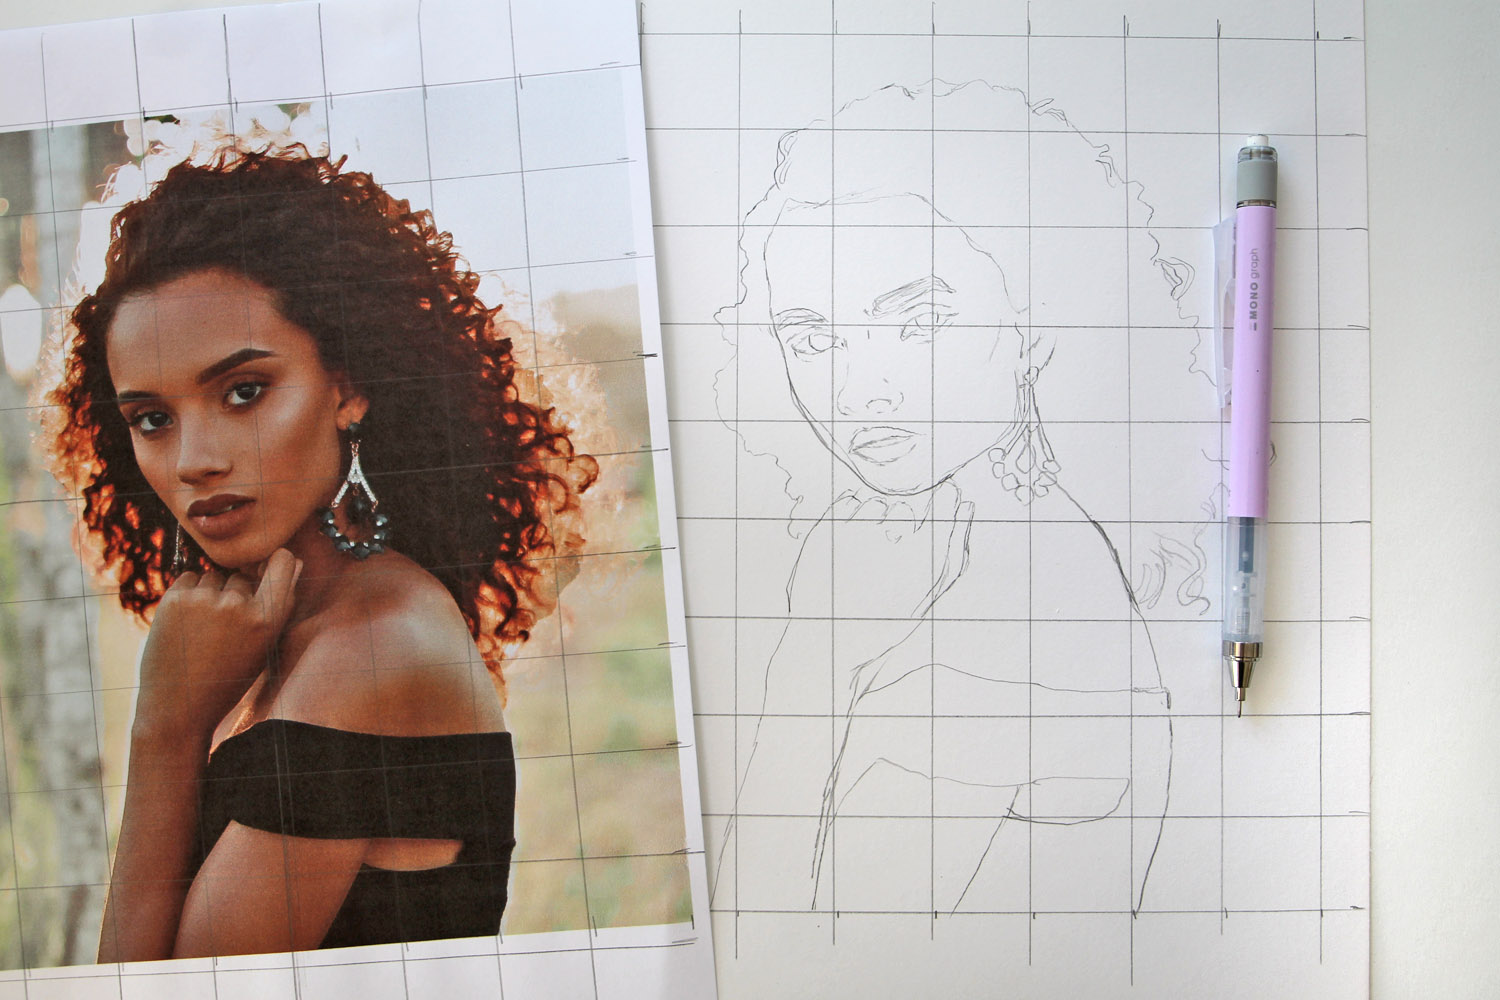 Introduction to Portrait Art Using The Grid Drawing Method - @studio.katie